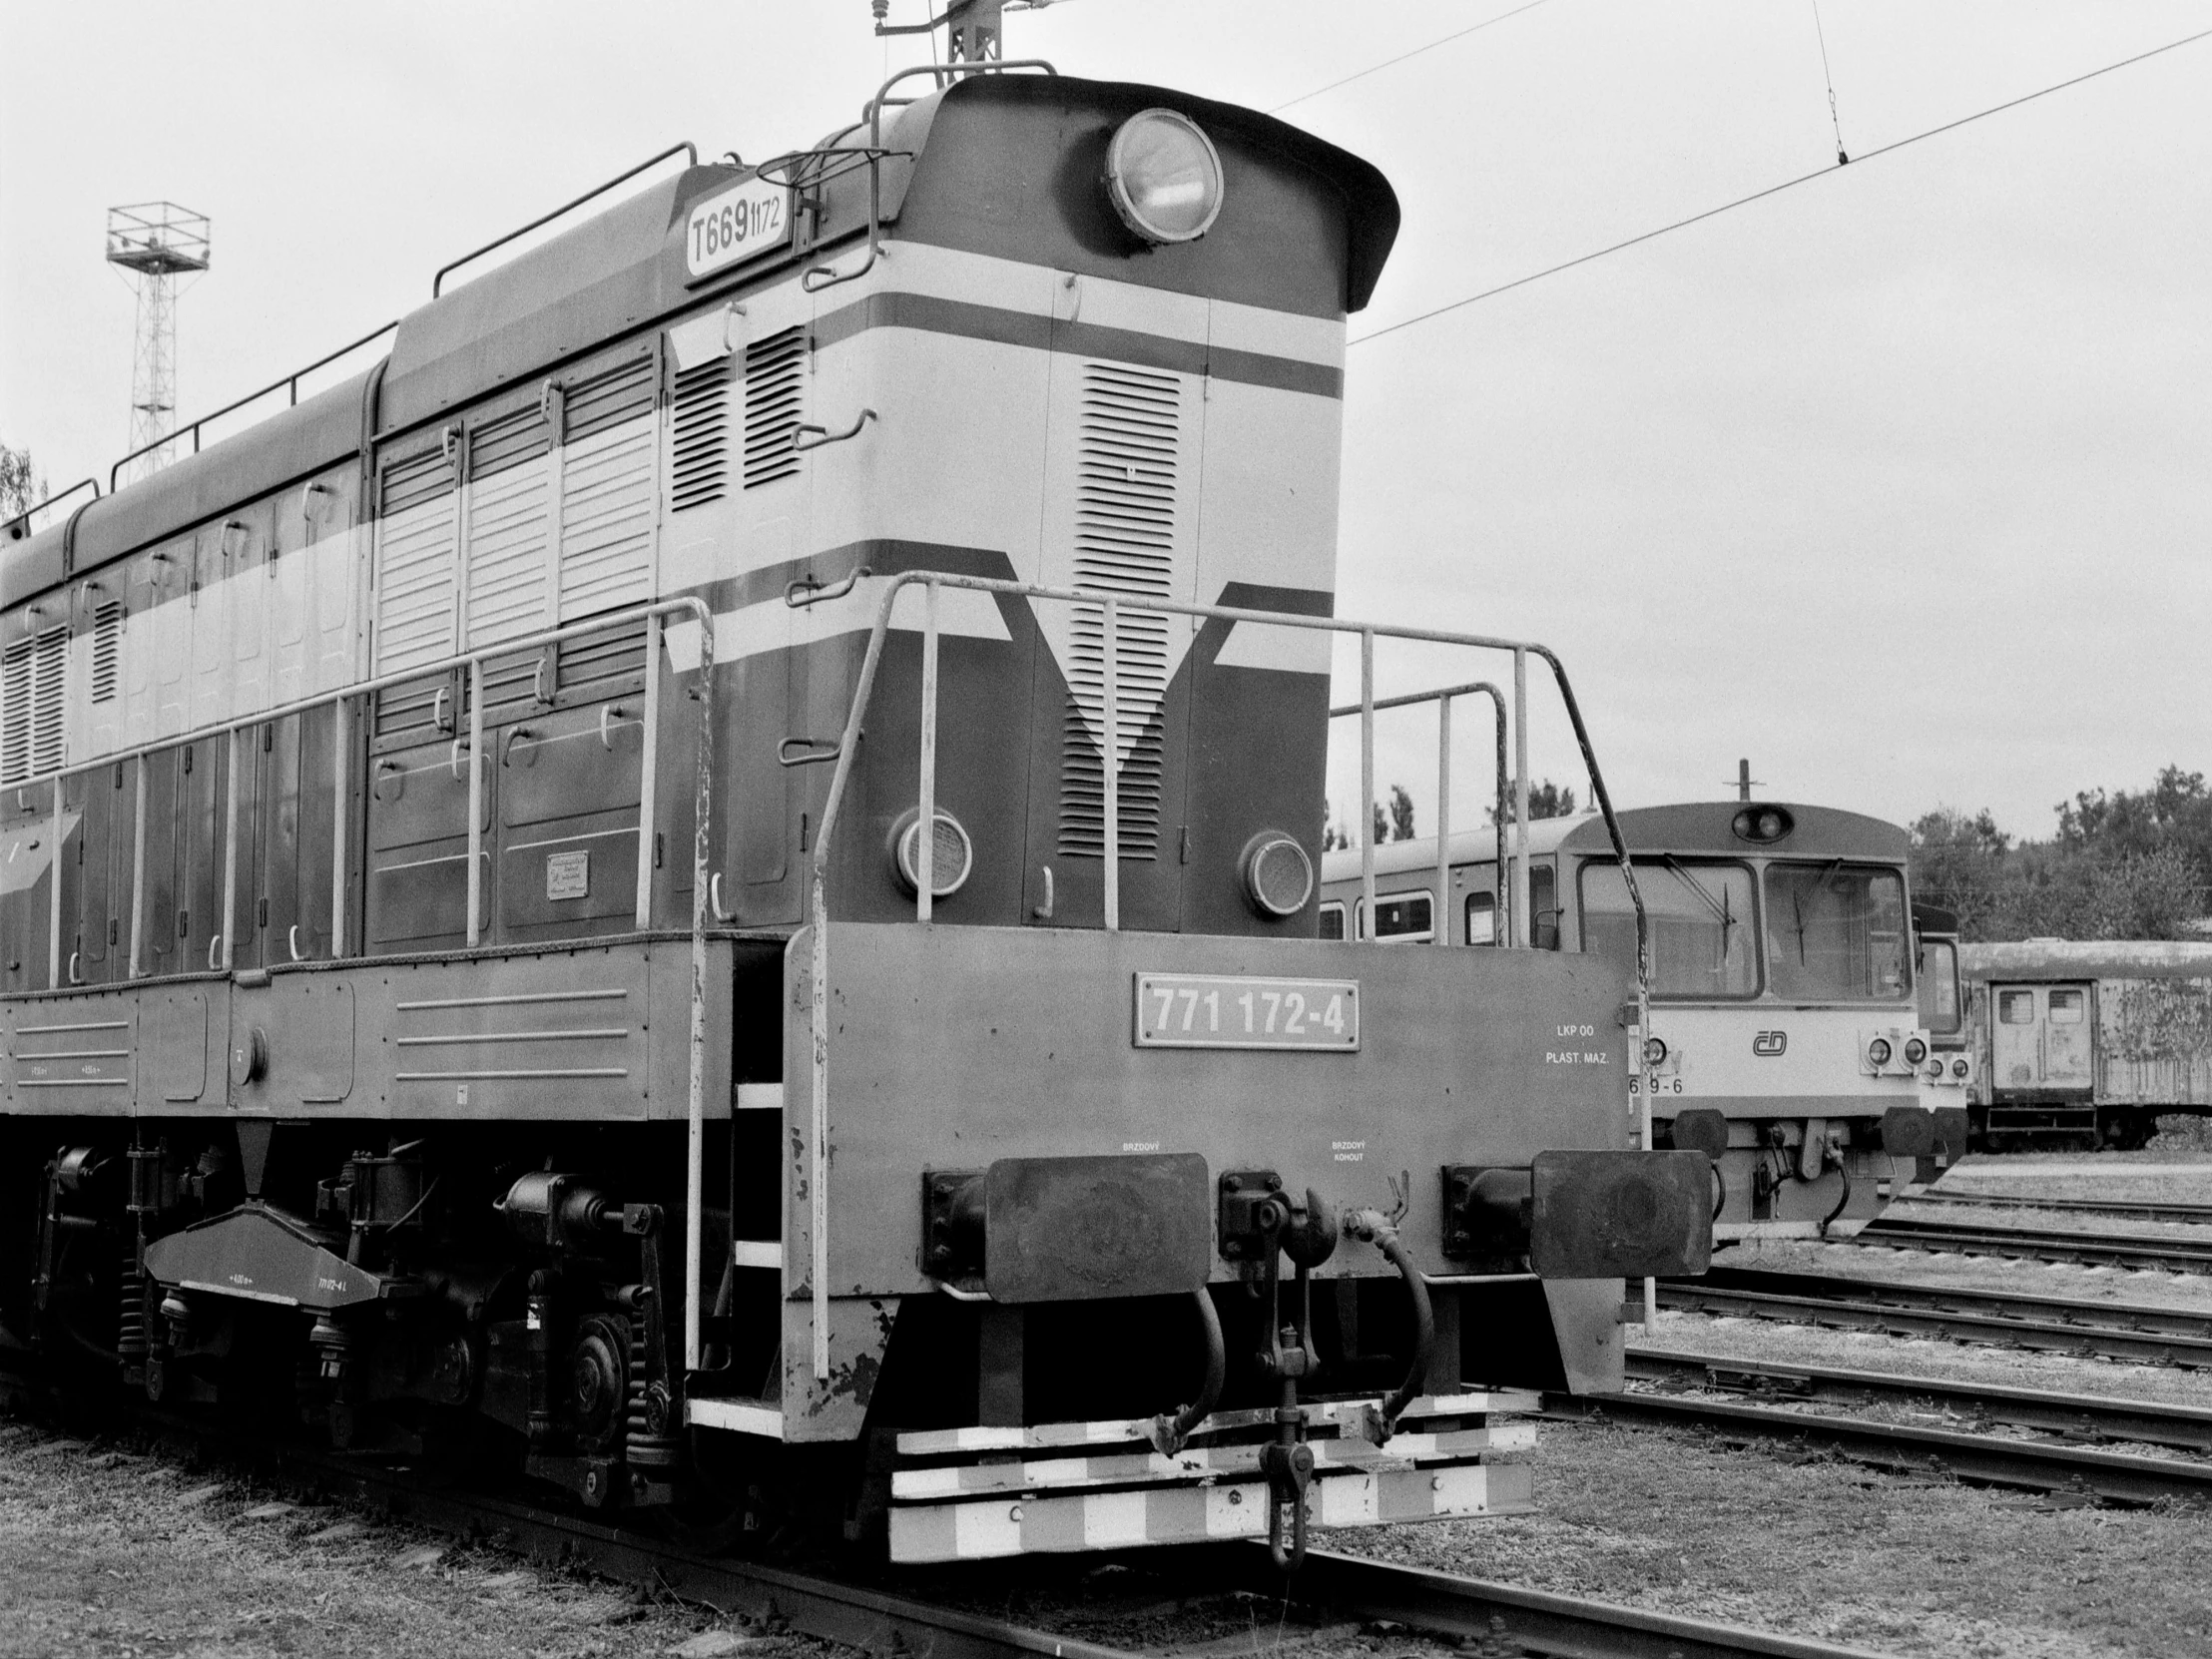 a black and white image of a train on railroad tracks